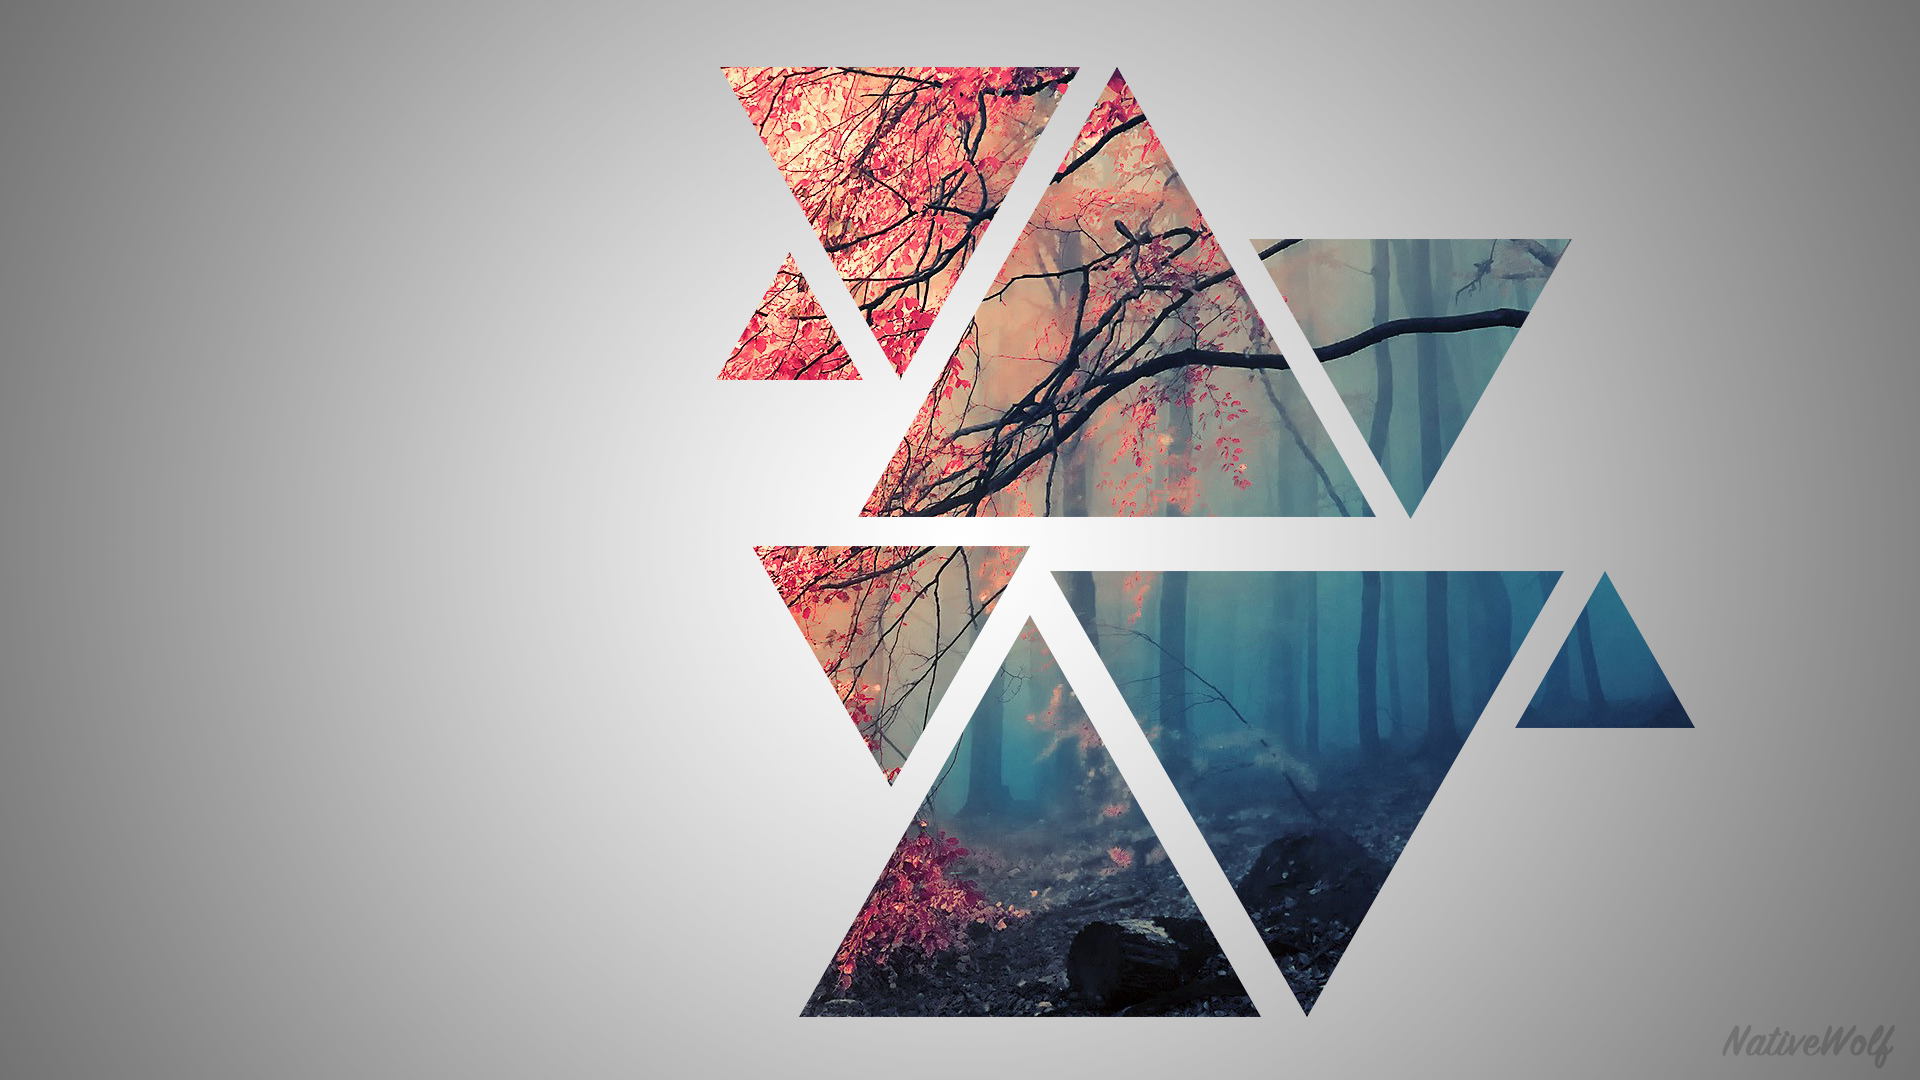 General 1920x1080 cherry blossom triangle simple background digital art geometric figures gray background collage watermarked